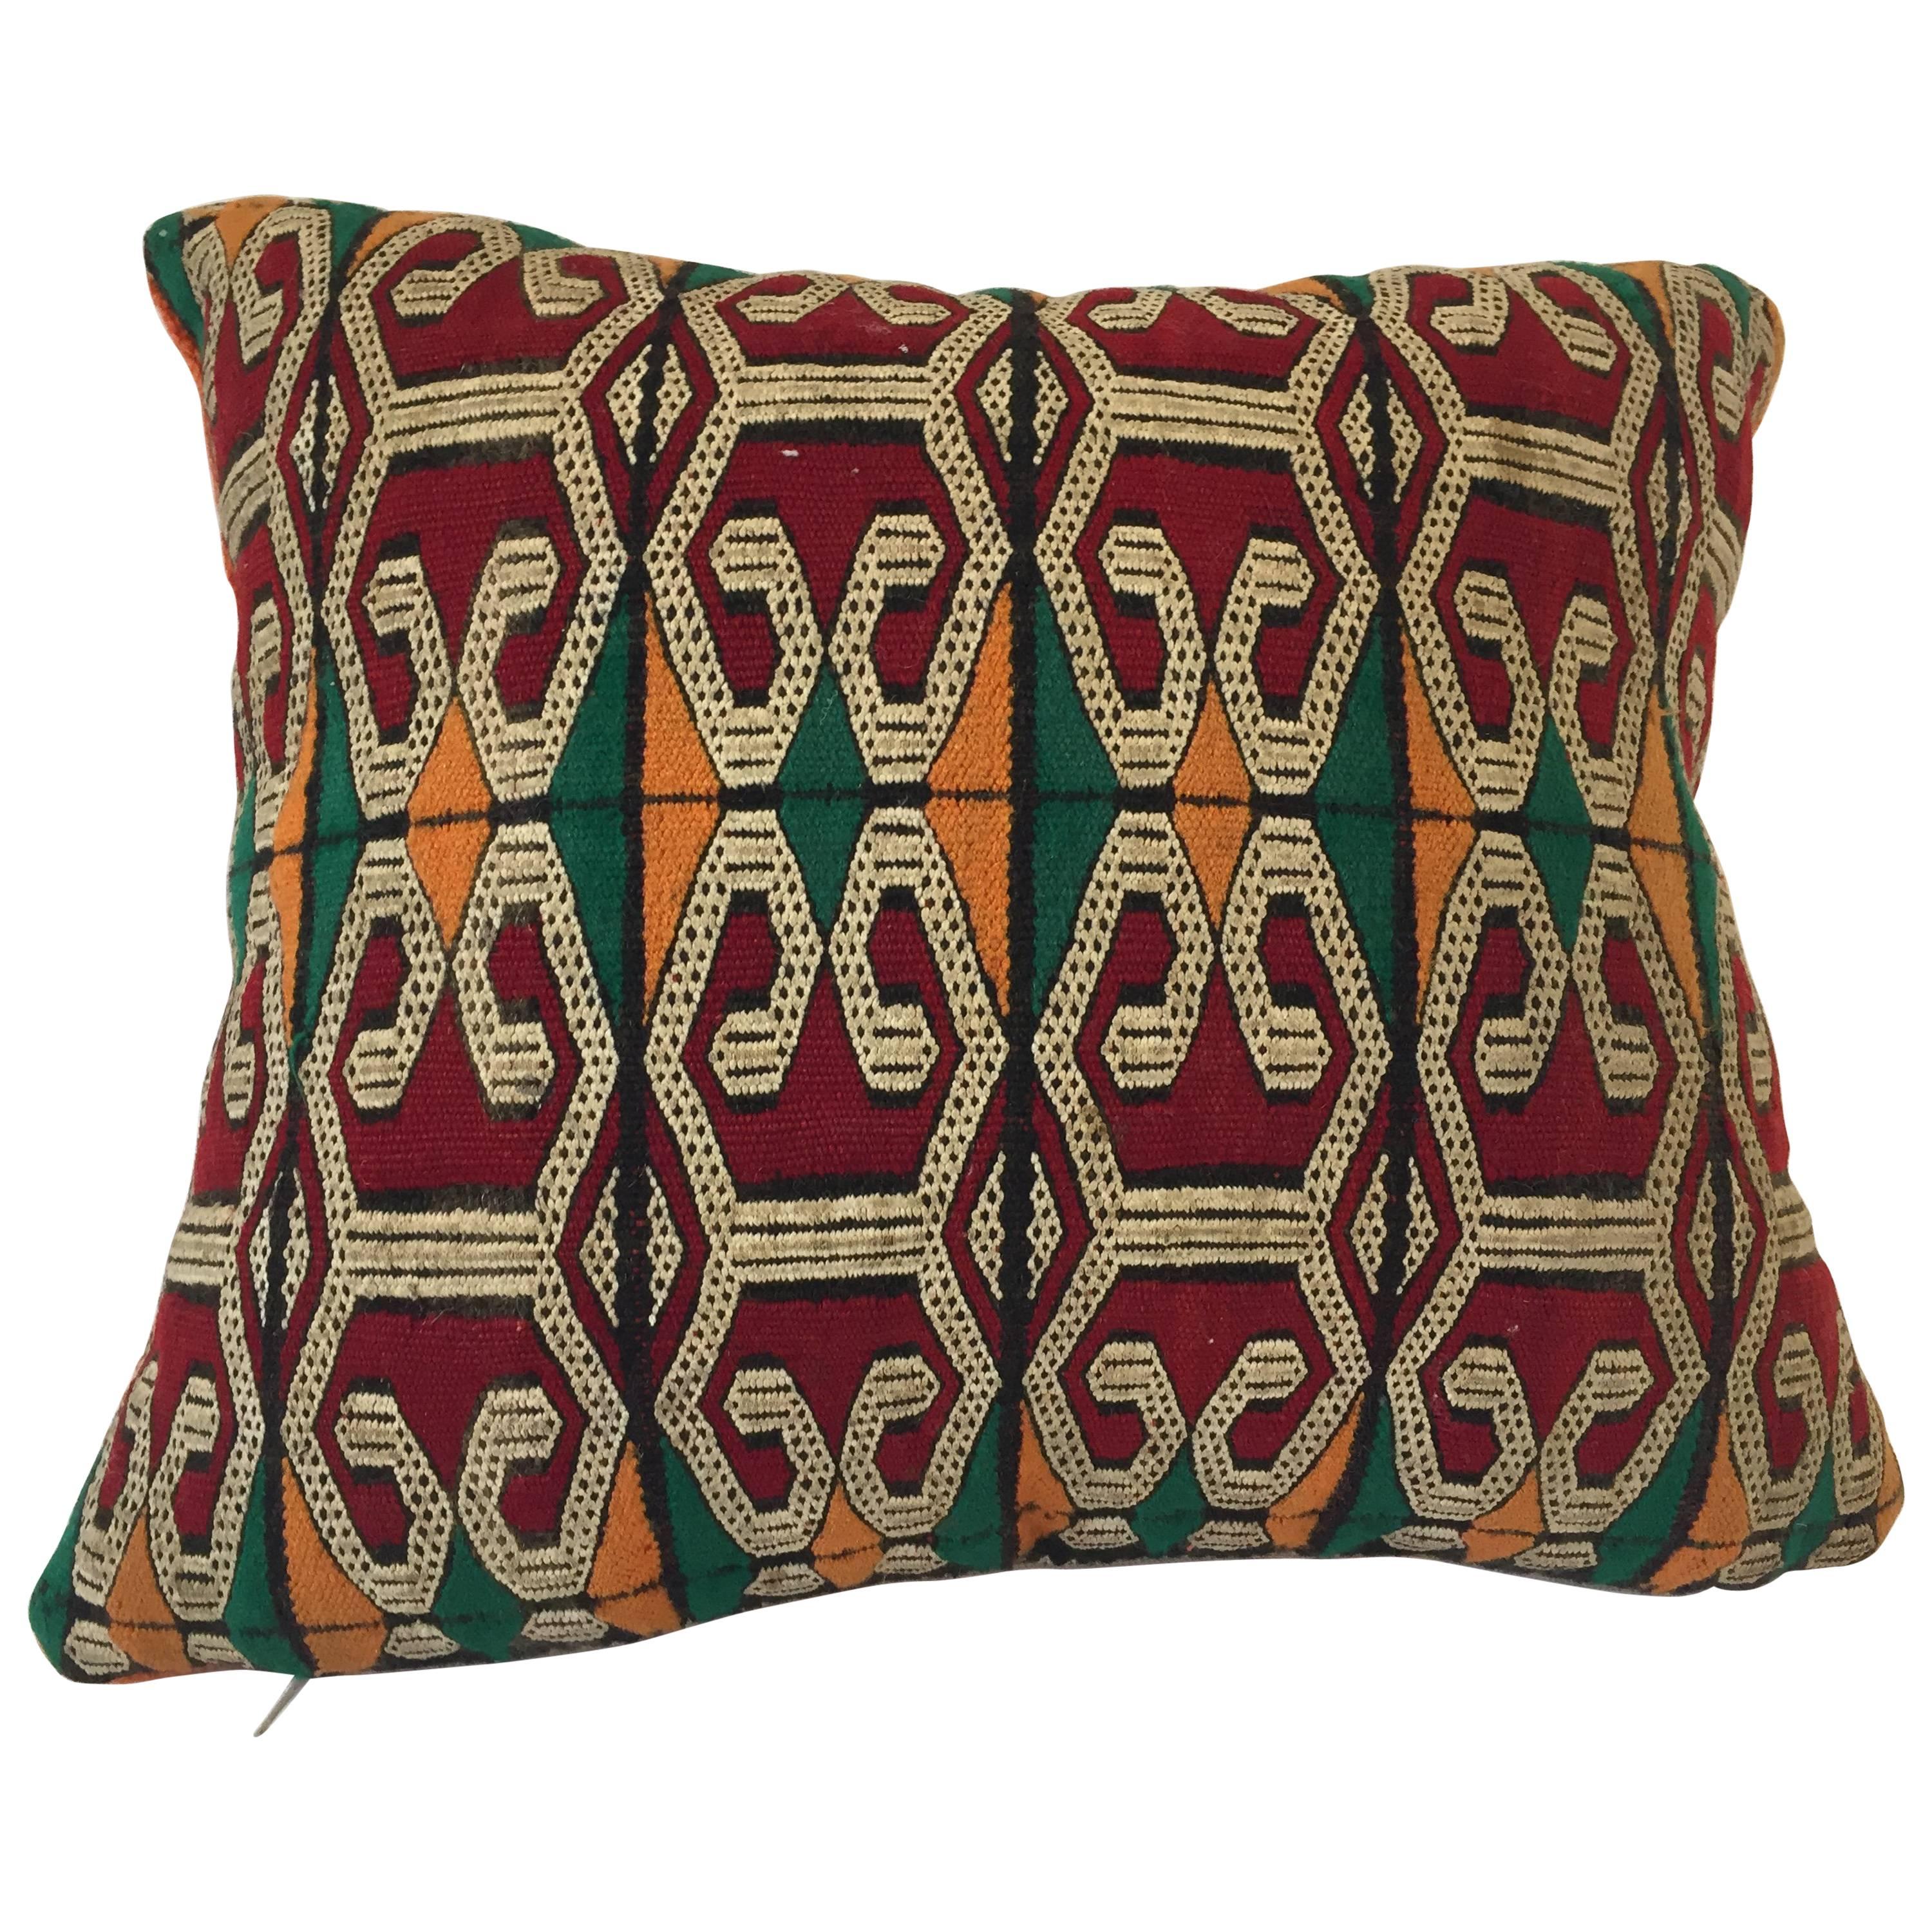 Moroccan Handwoven Pillow with Tribal African Designs